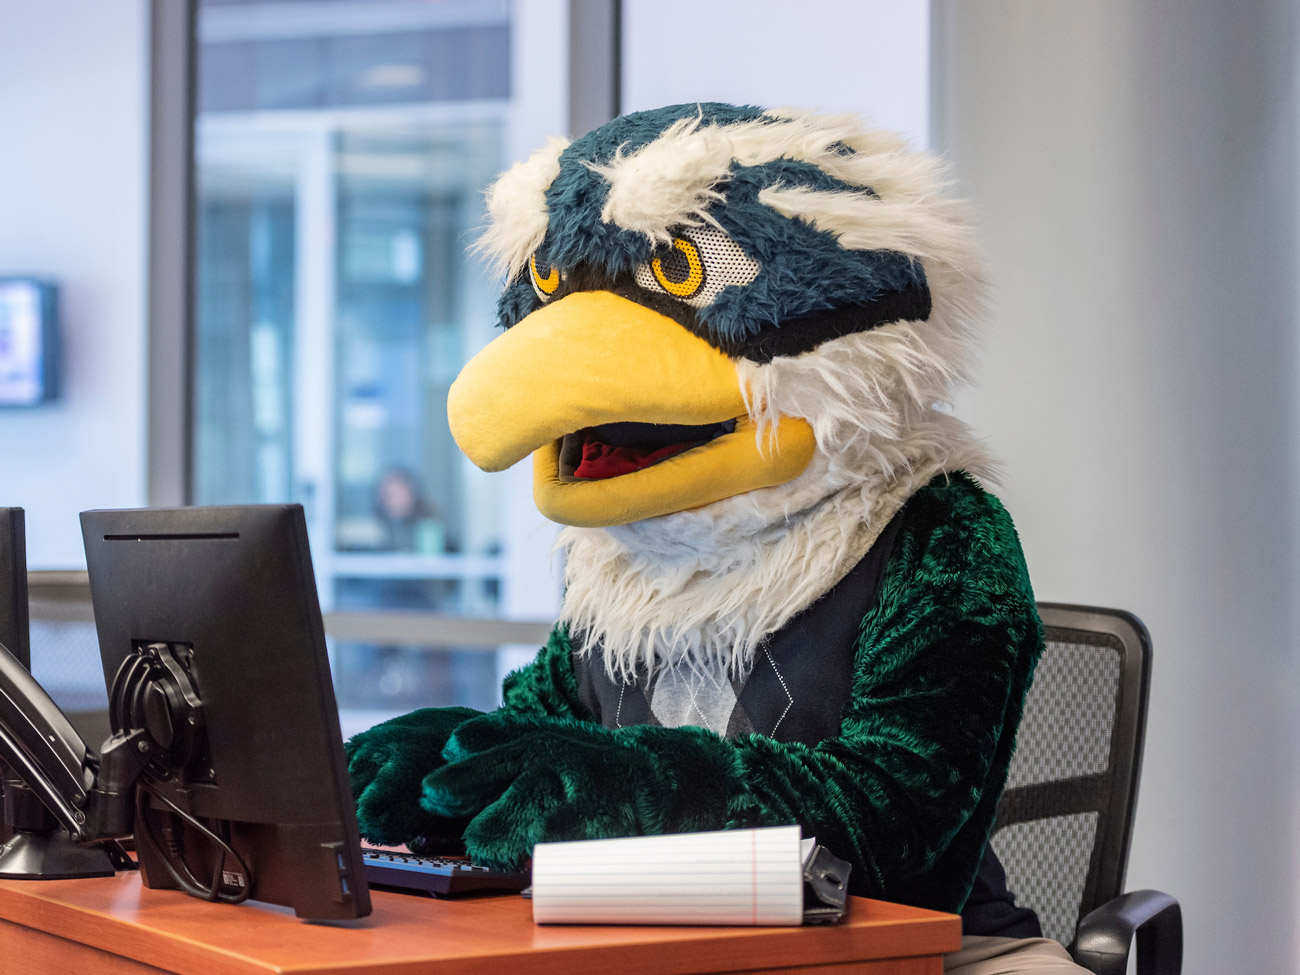 Our mascot Sammy Seahawk uses a UNCW computer